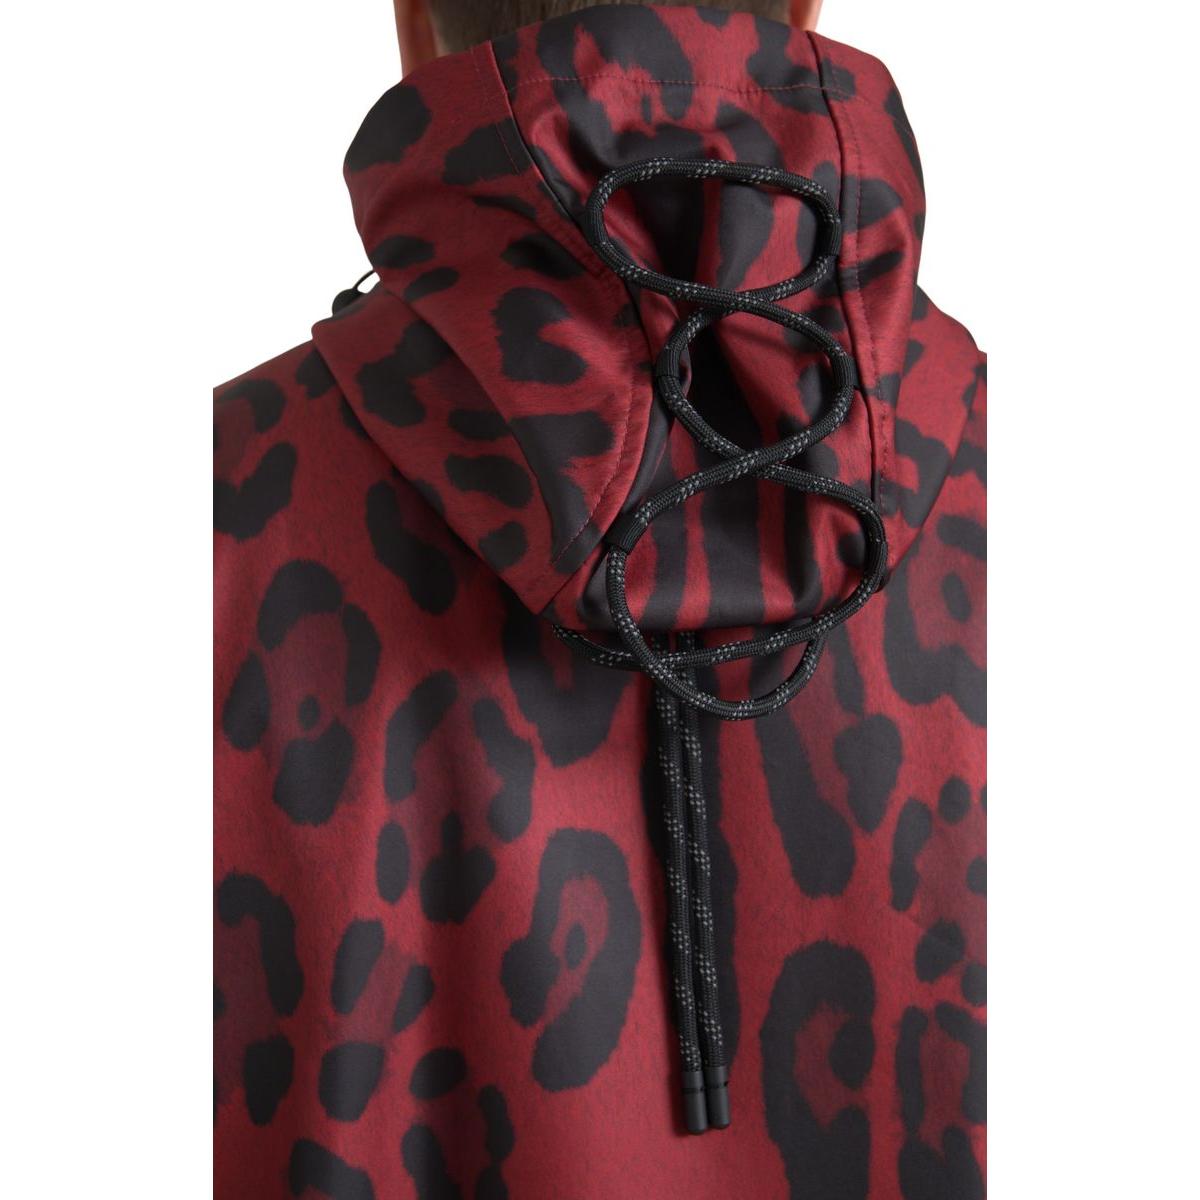 Dolce & Gabbana Radiant Red Leopard Print Hooded Jacket red-leopard-hooded-rain-coat-jacket